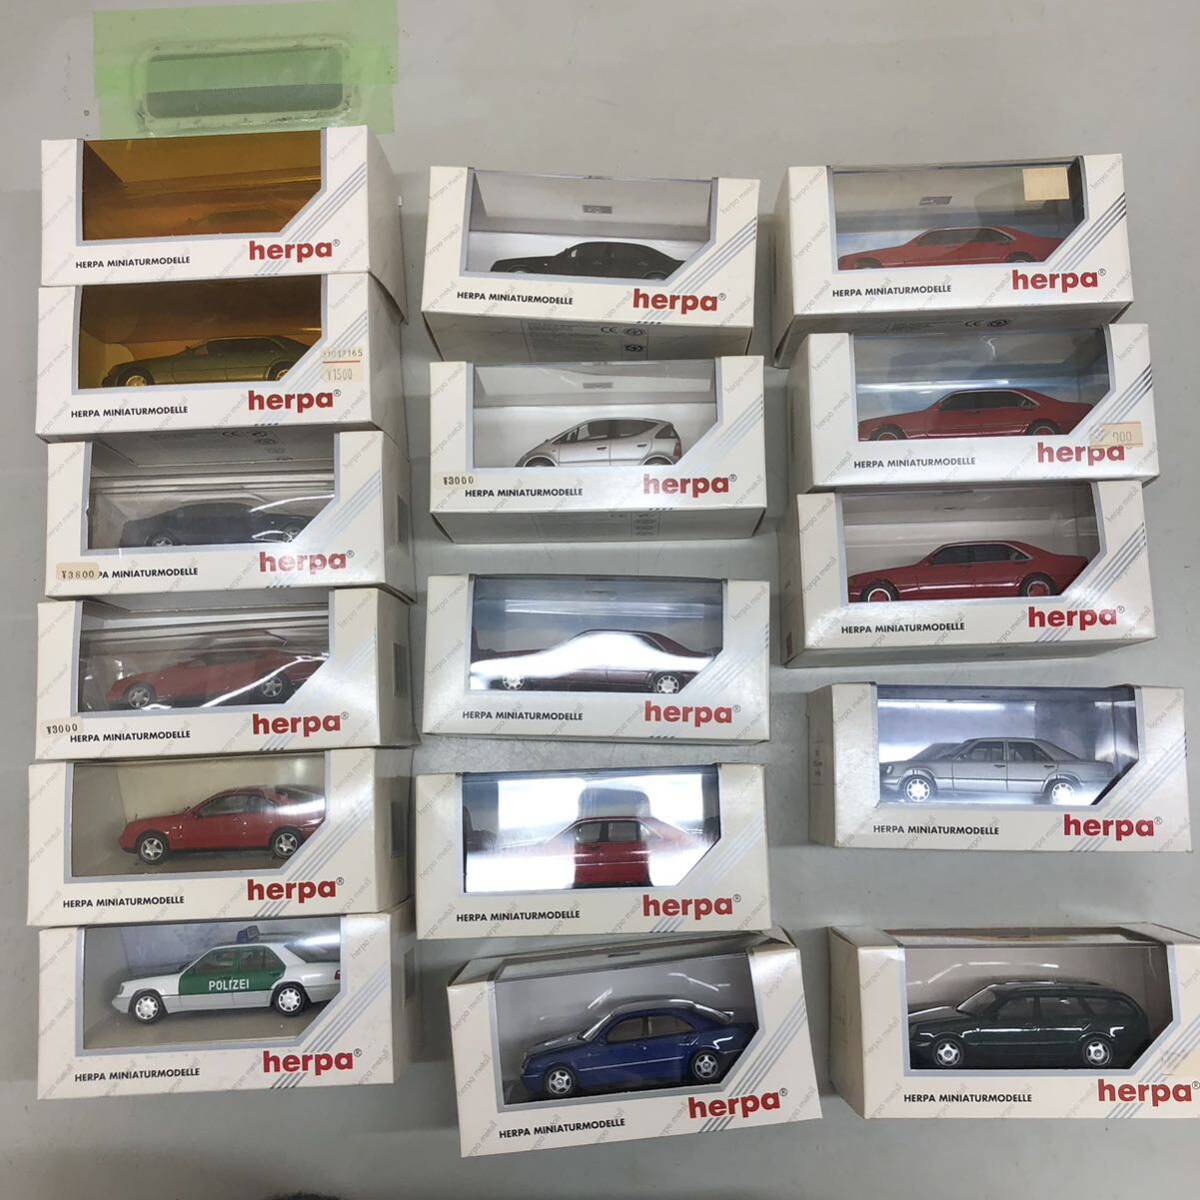 herpa Herpa 1/43 minicar Benz etc. various together present condition goods Mercedes Benz 600 SEL E 320 Limousine